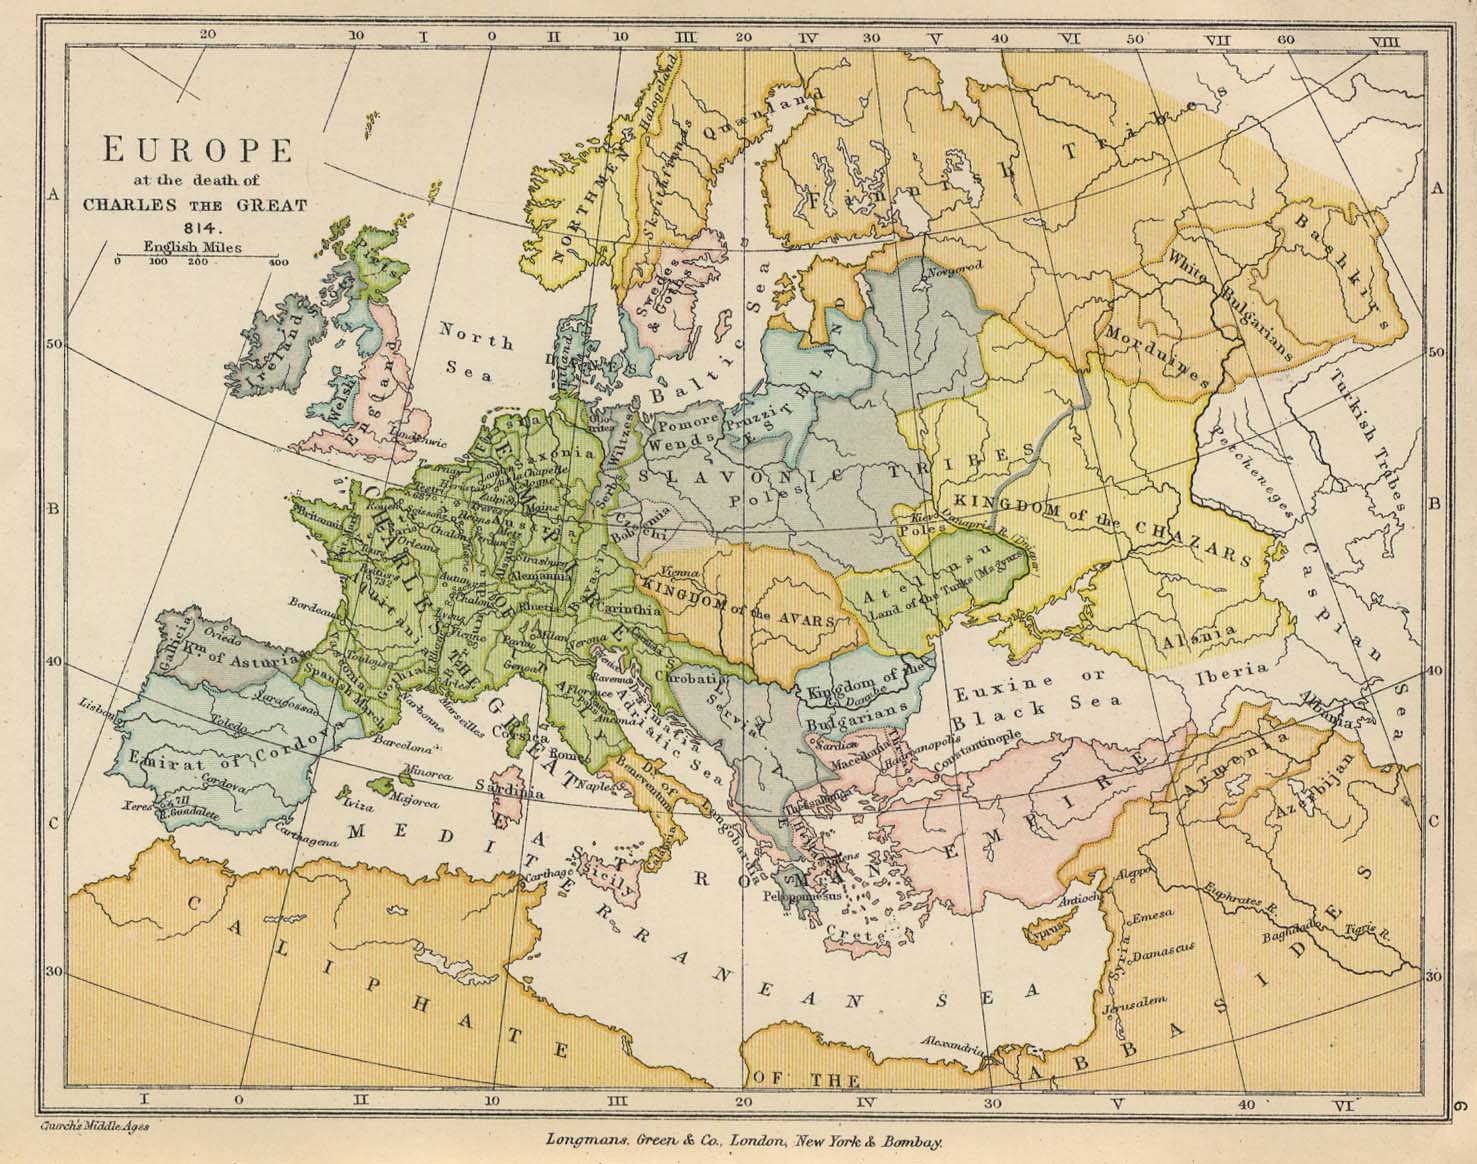 Map of Europe at the death of Charles the Great, 814